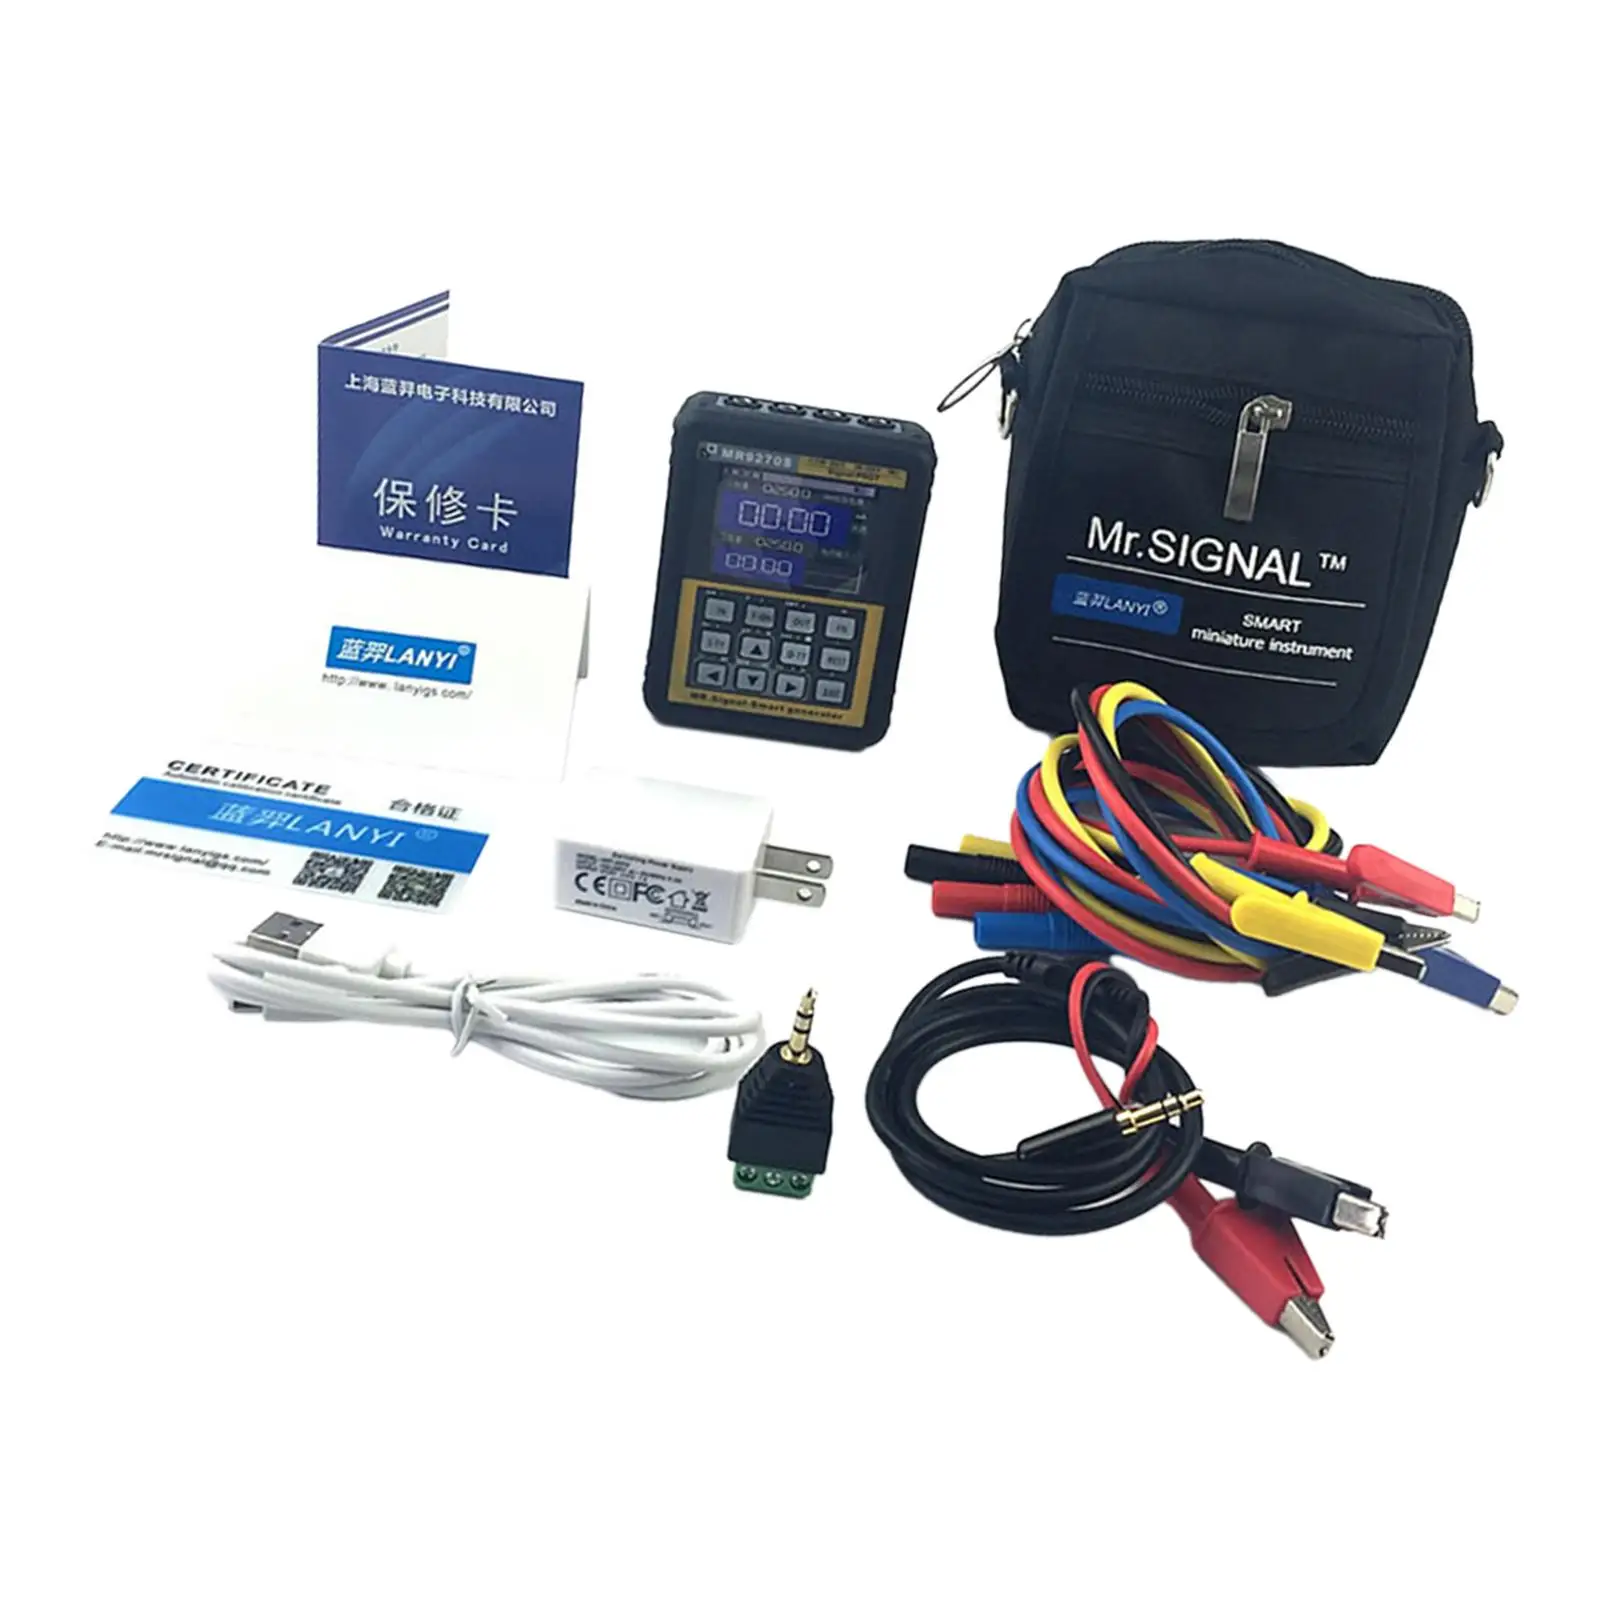 4-20MA Signal Generator 2.4inch LCD Display Electrical Testing Tools Calibration Current Voltage Thermocouple Paperless Logger